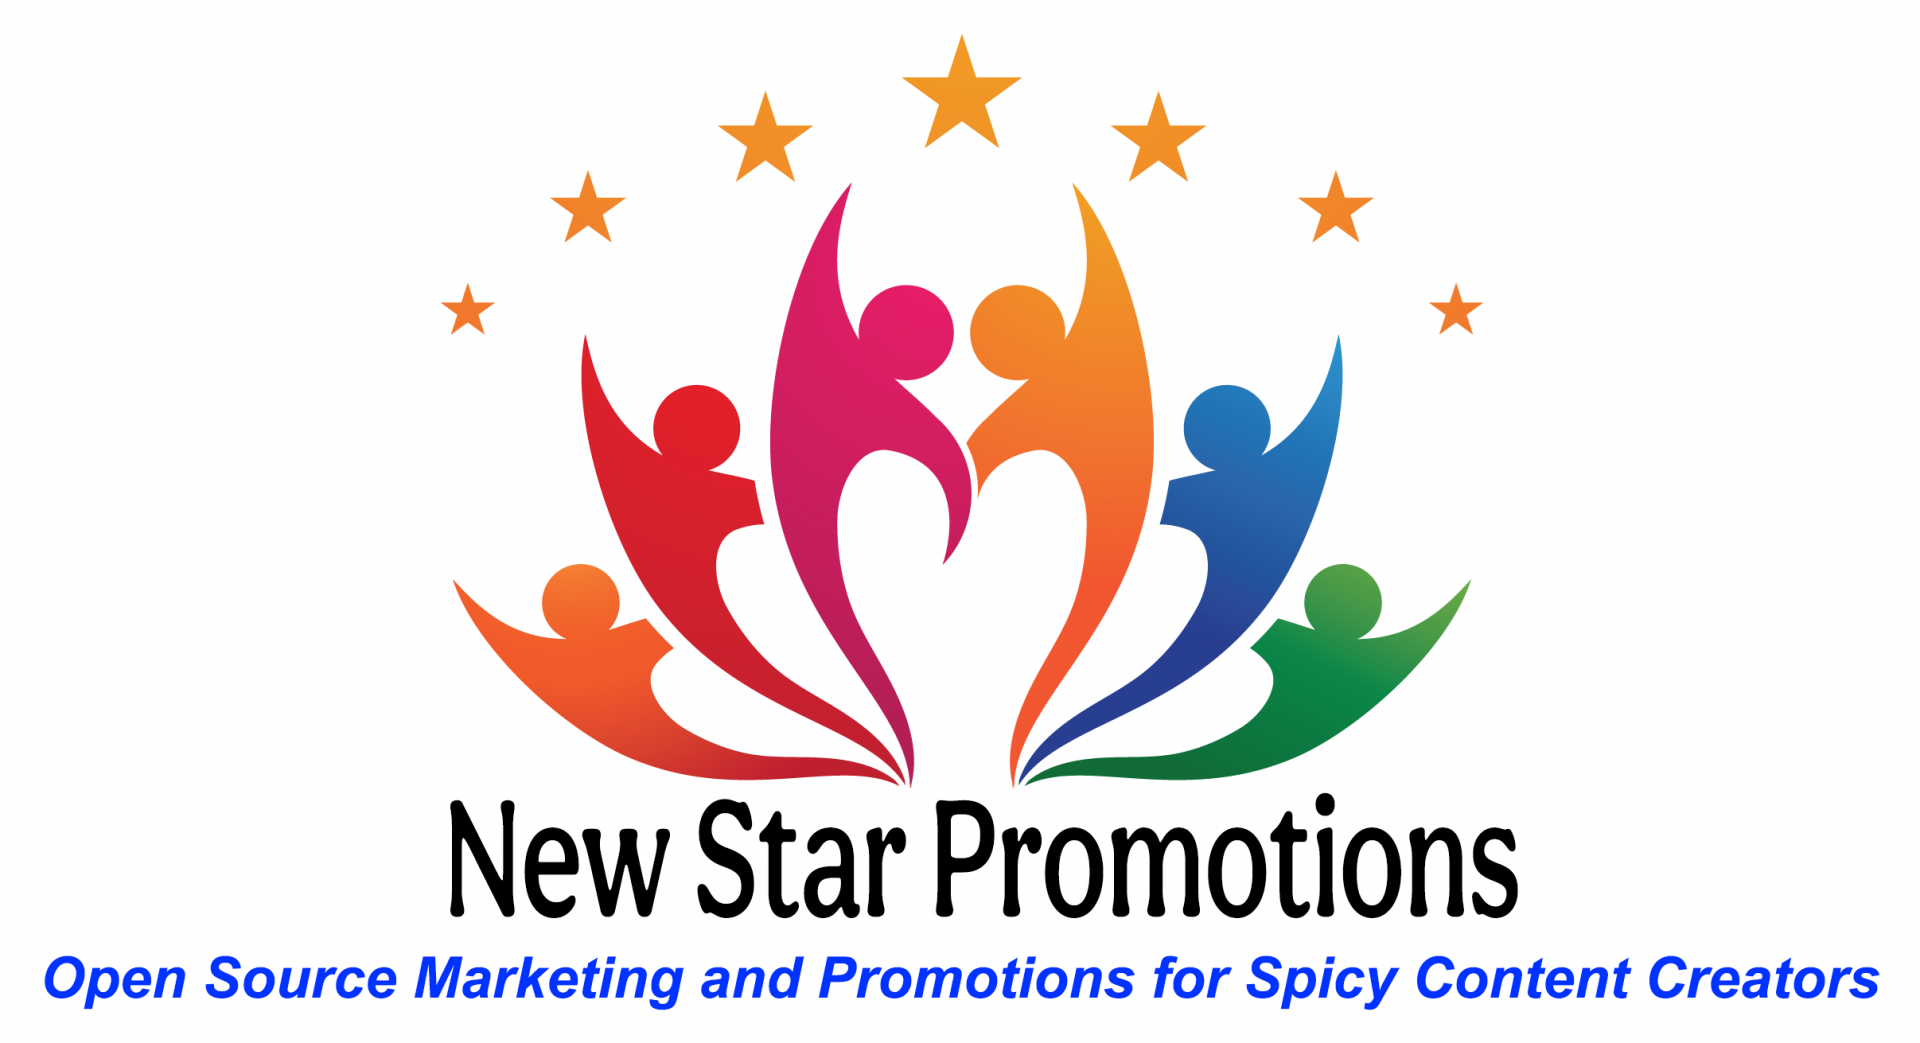 New Star Promotions